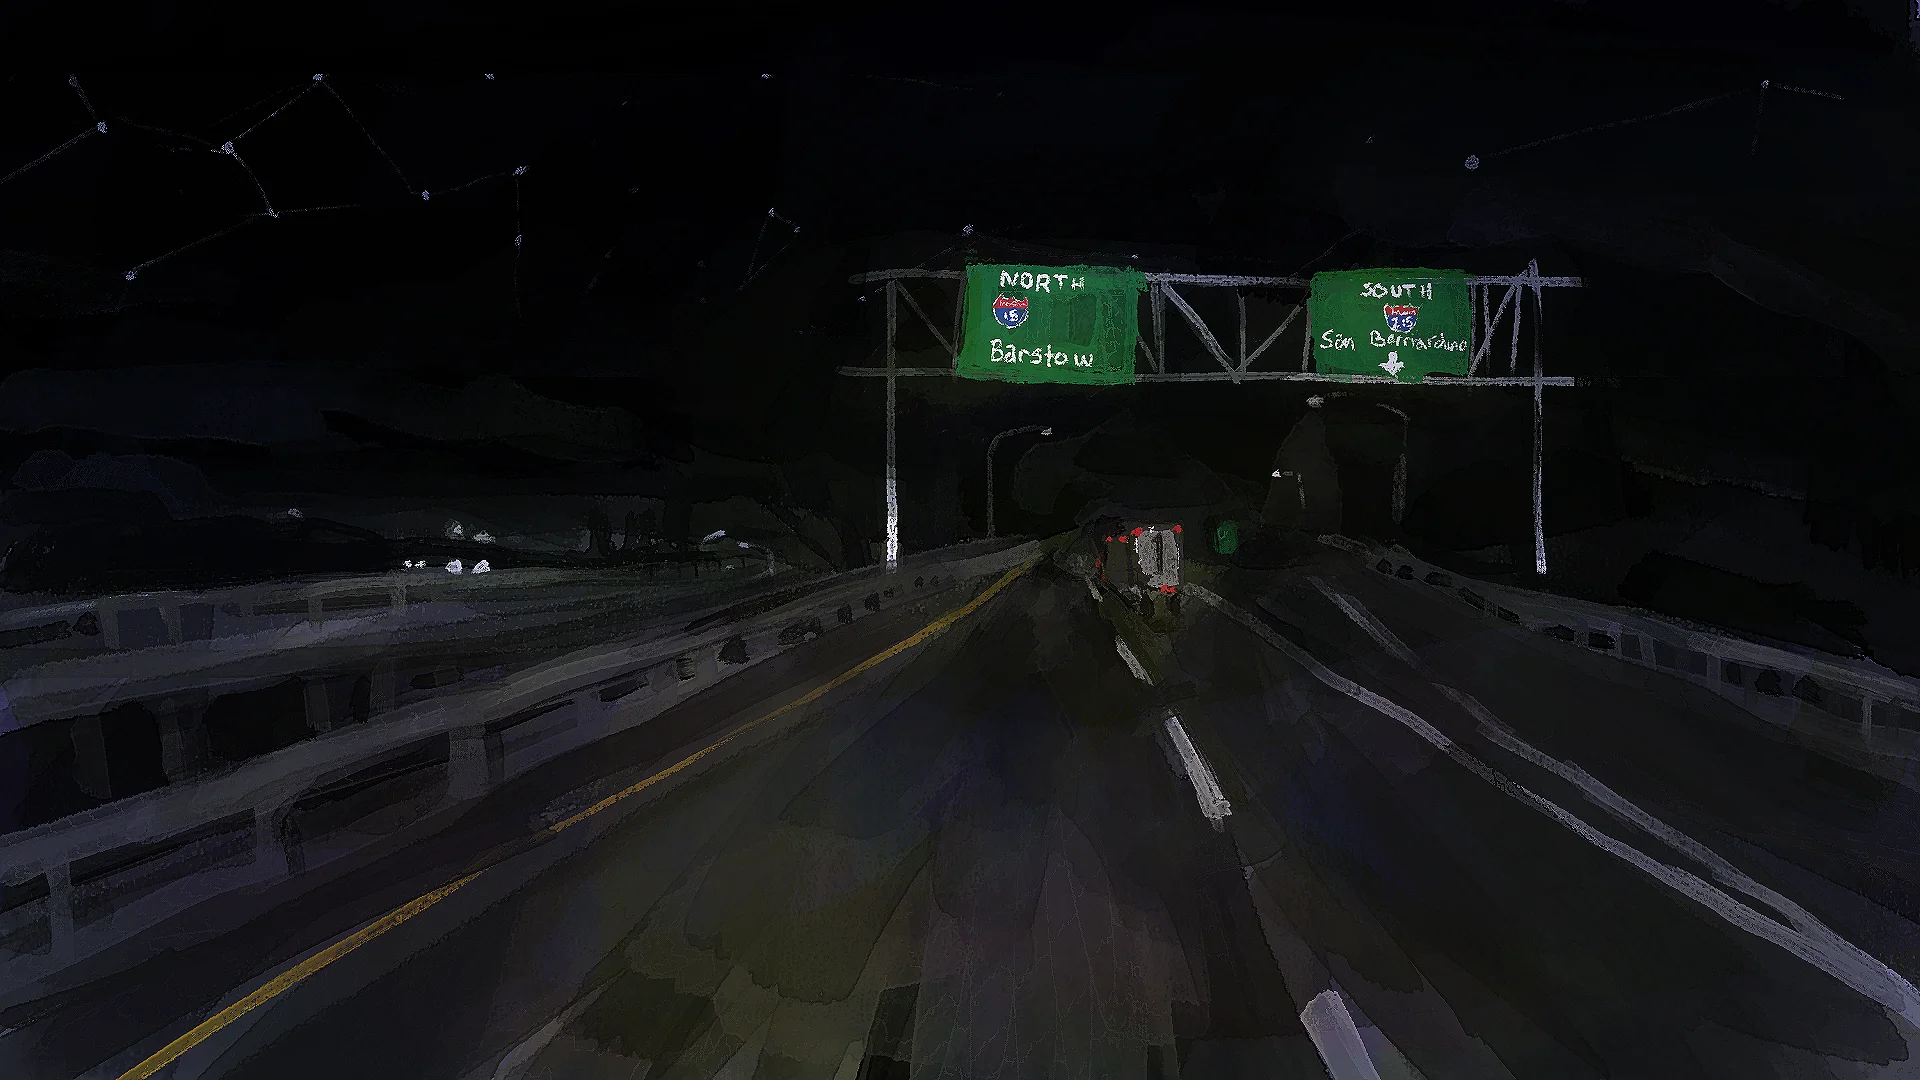 A painting of I-15 eastbound at night, from the perspective of the far left lane. There is a sign ahead over a fork in the road that reads 'NORTH INTERSTATE 15 BARSTOW' above the left two lanes and 'SOUTH INTERSTATE 215 SAN BERNARDINO' above the lane to the right of the fork.